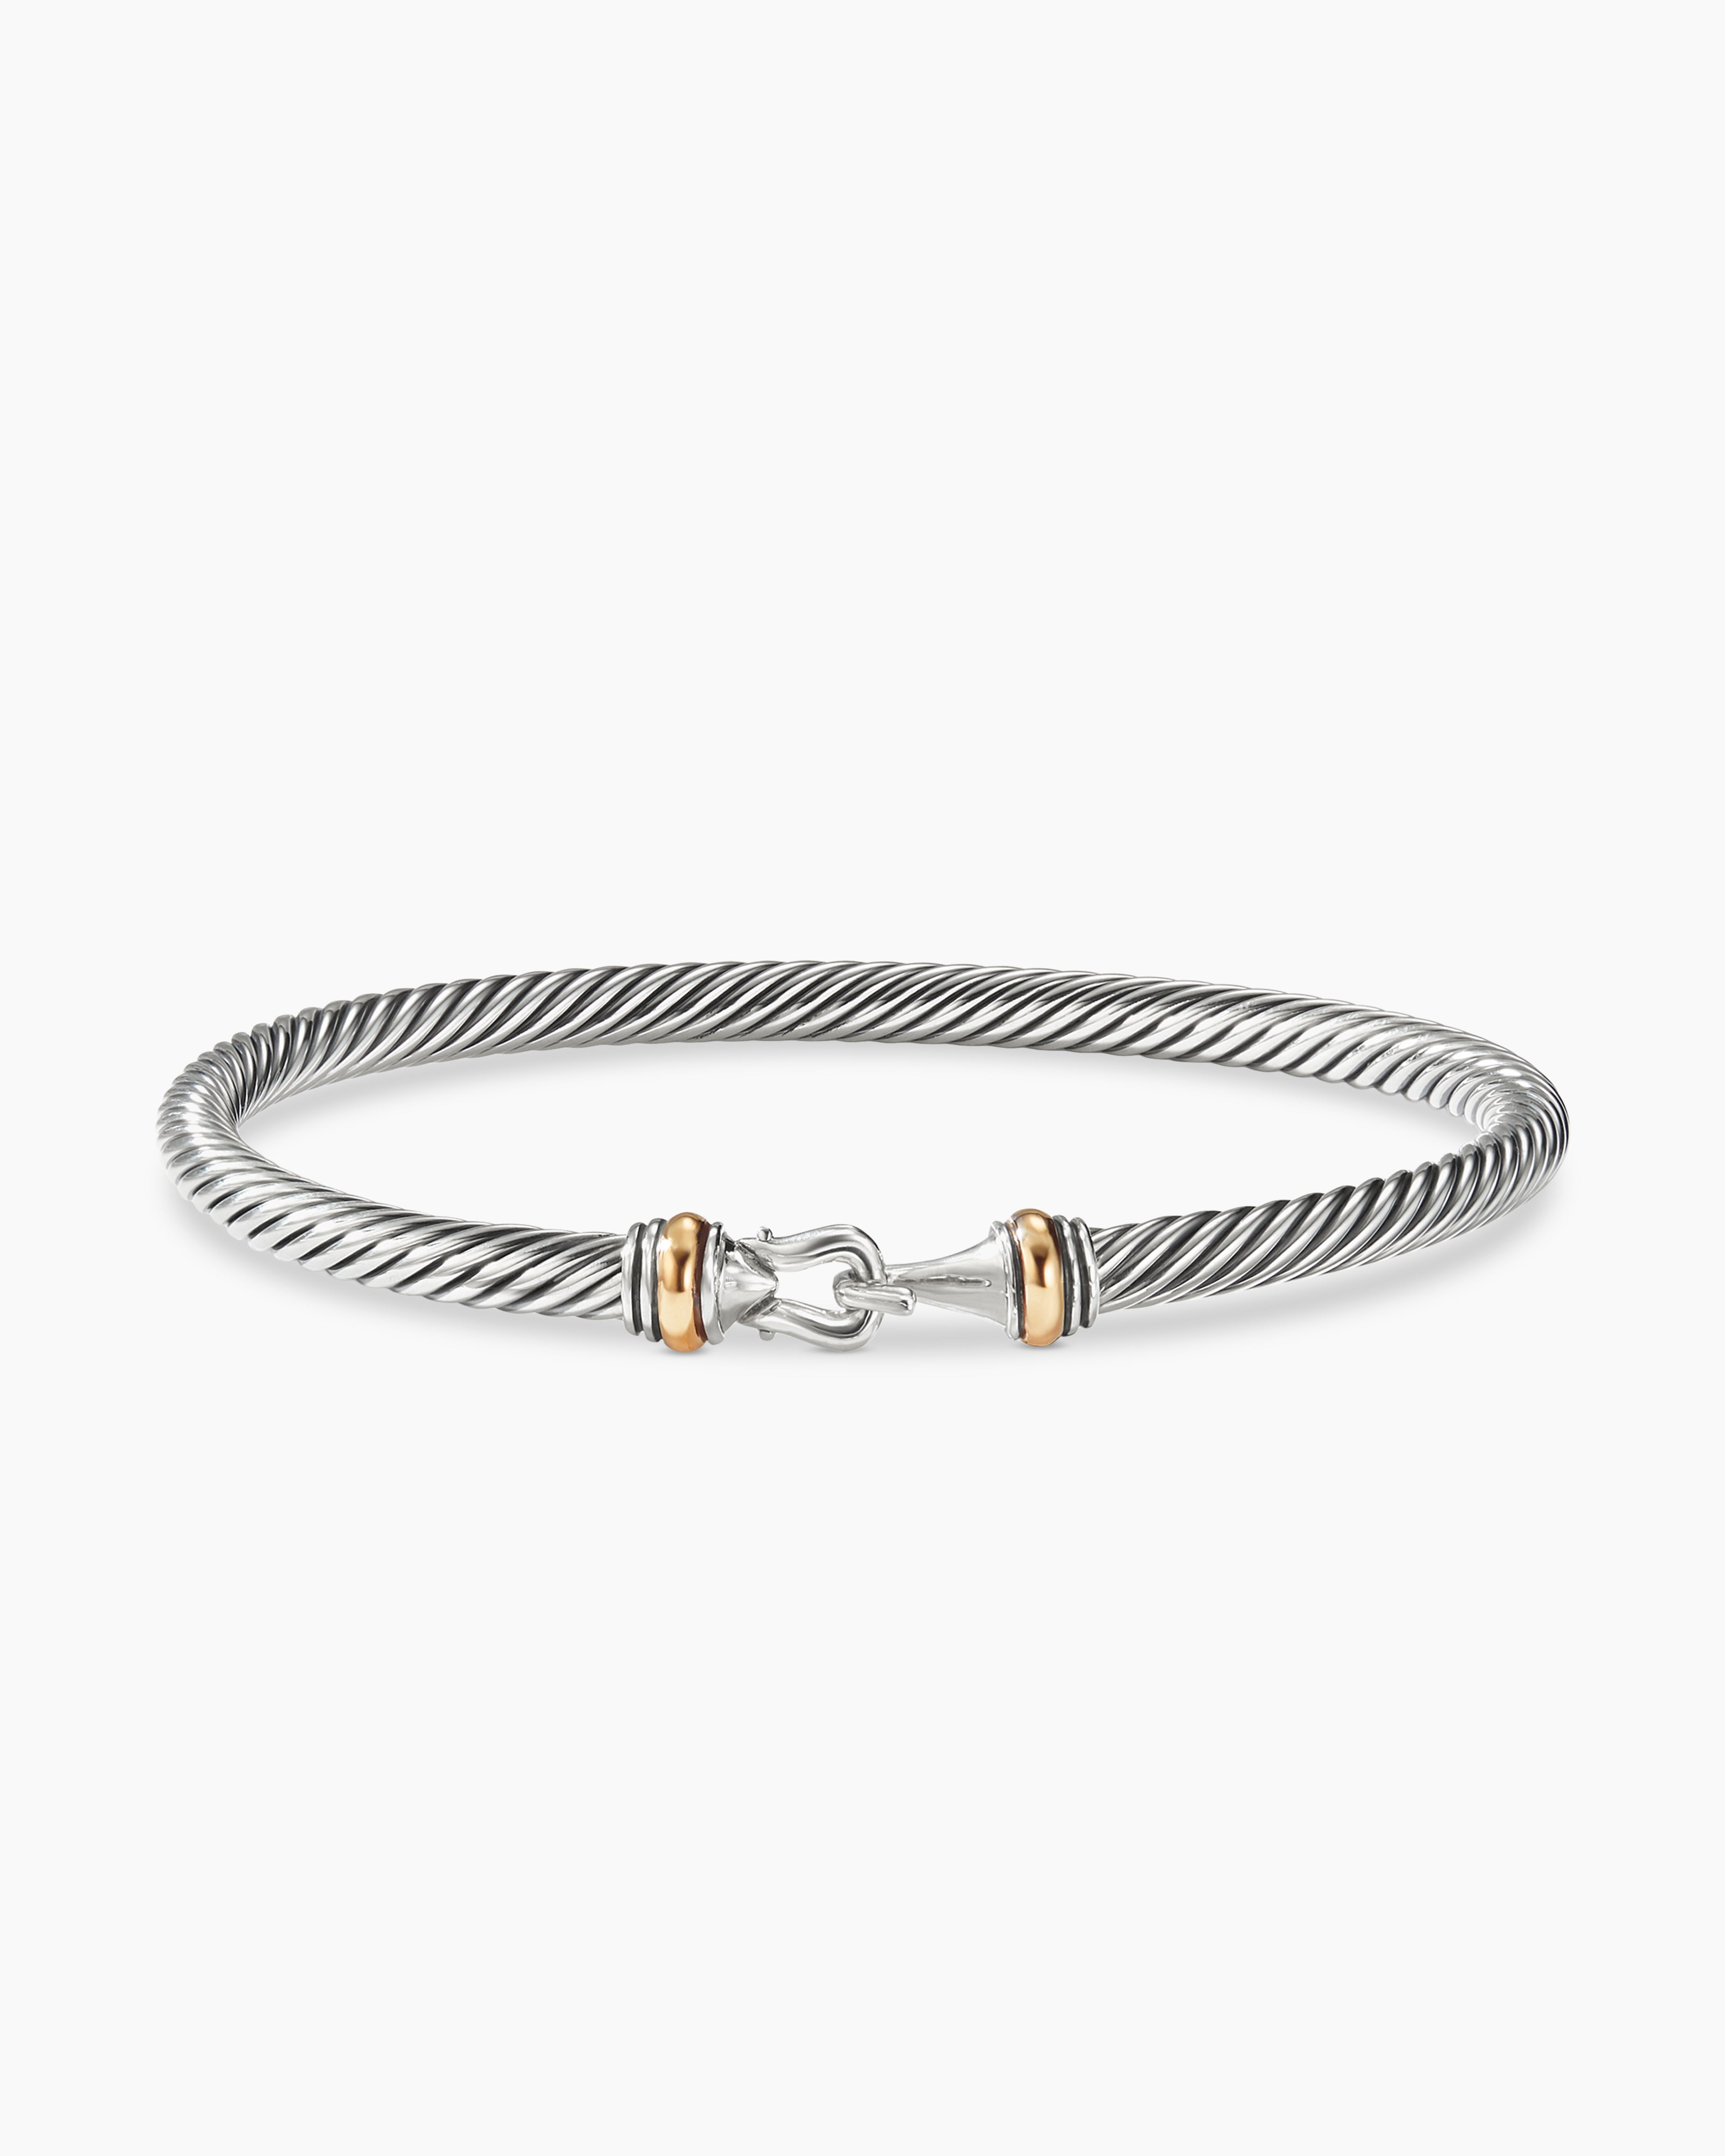 Buckle Classic Cable Bracelet in Sterling Silver with 18K Yellow Gold, 4mm  | David Yurman